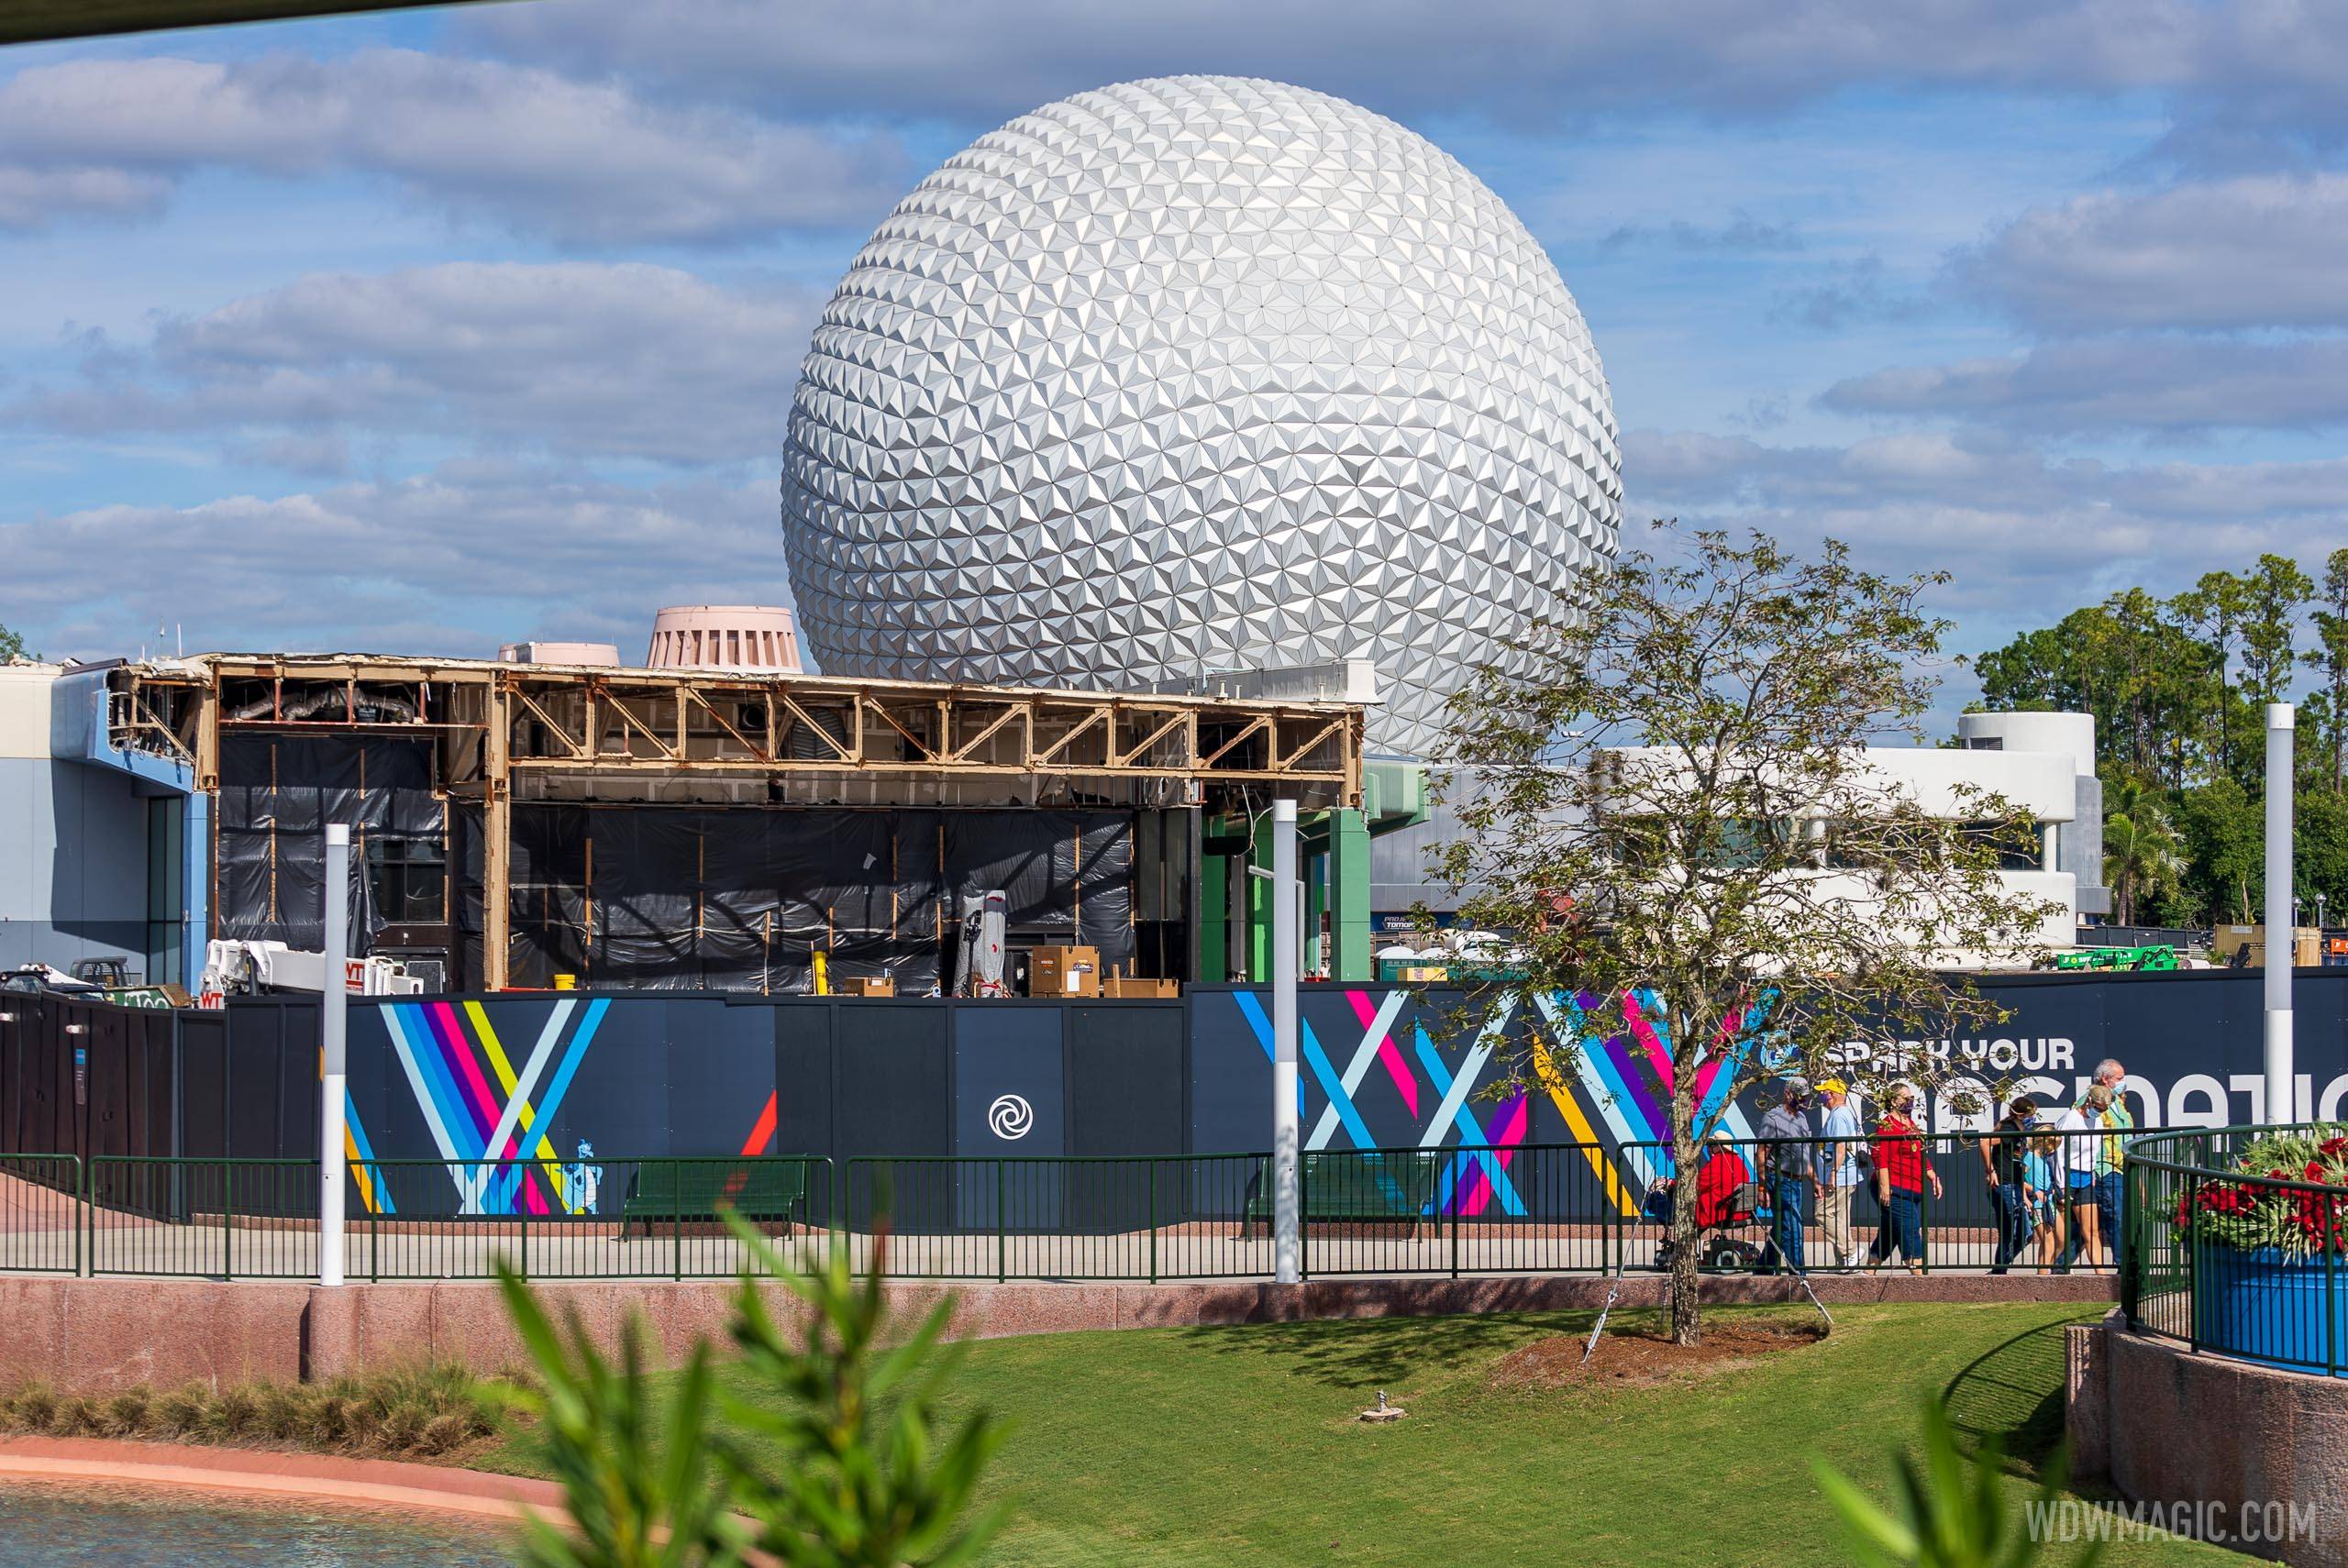 EPCOT Future World West and East demolition - December 3 2020